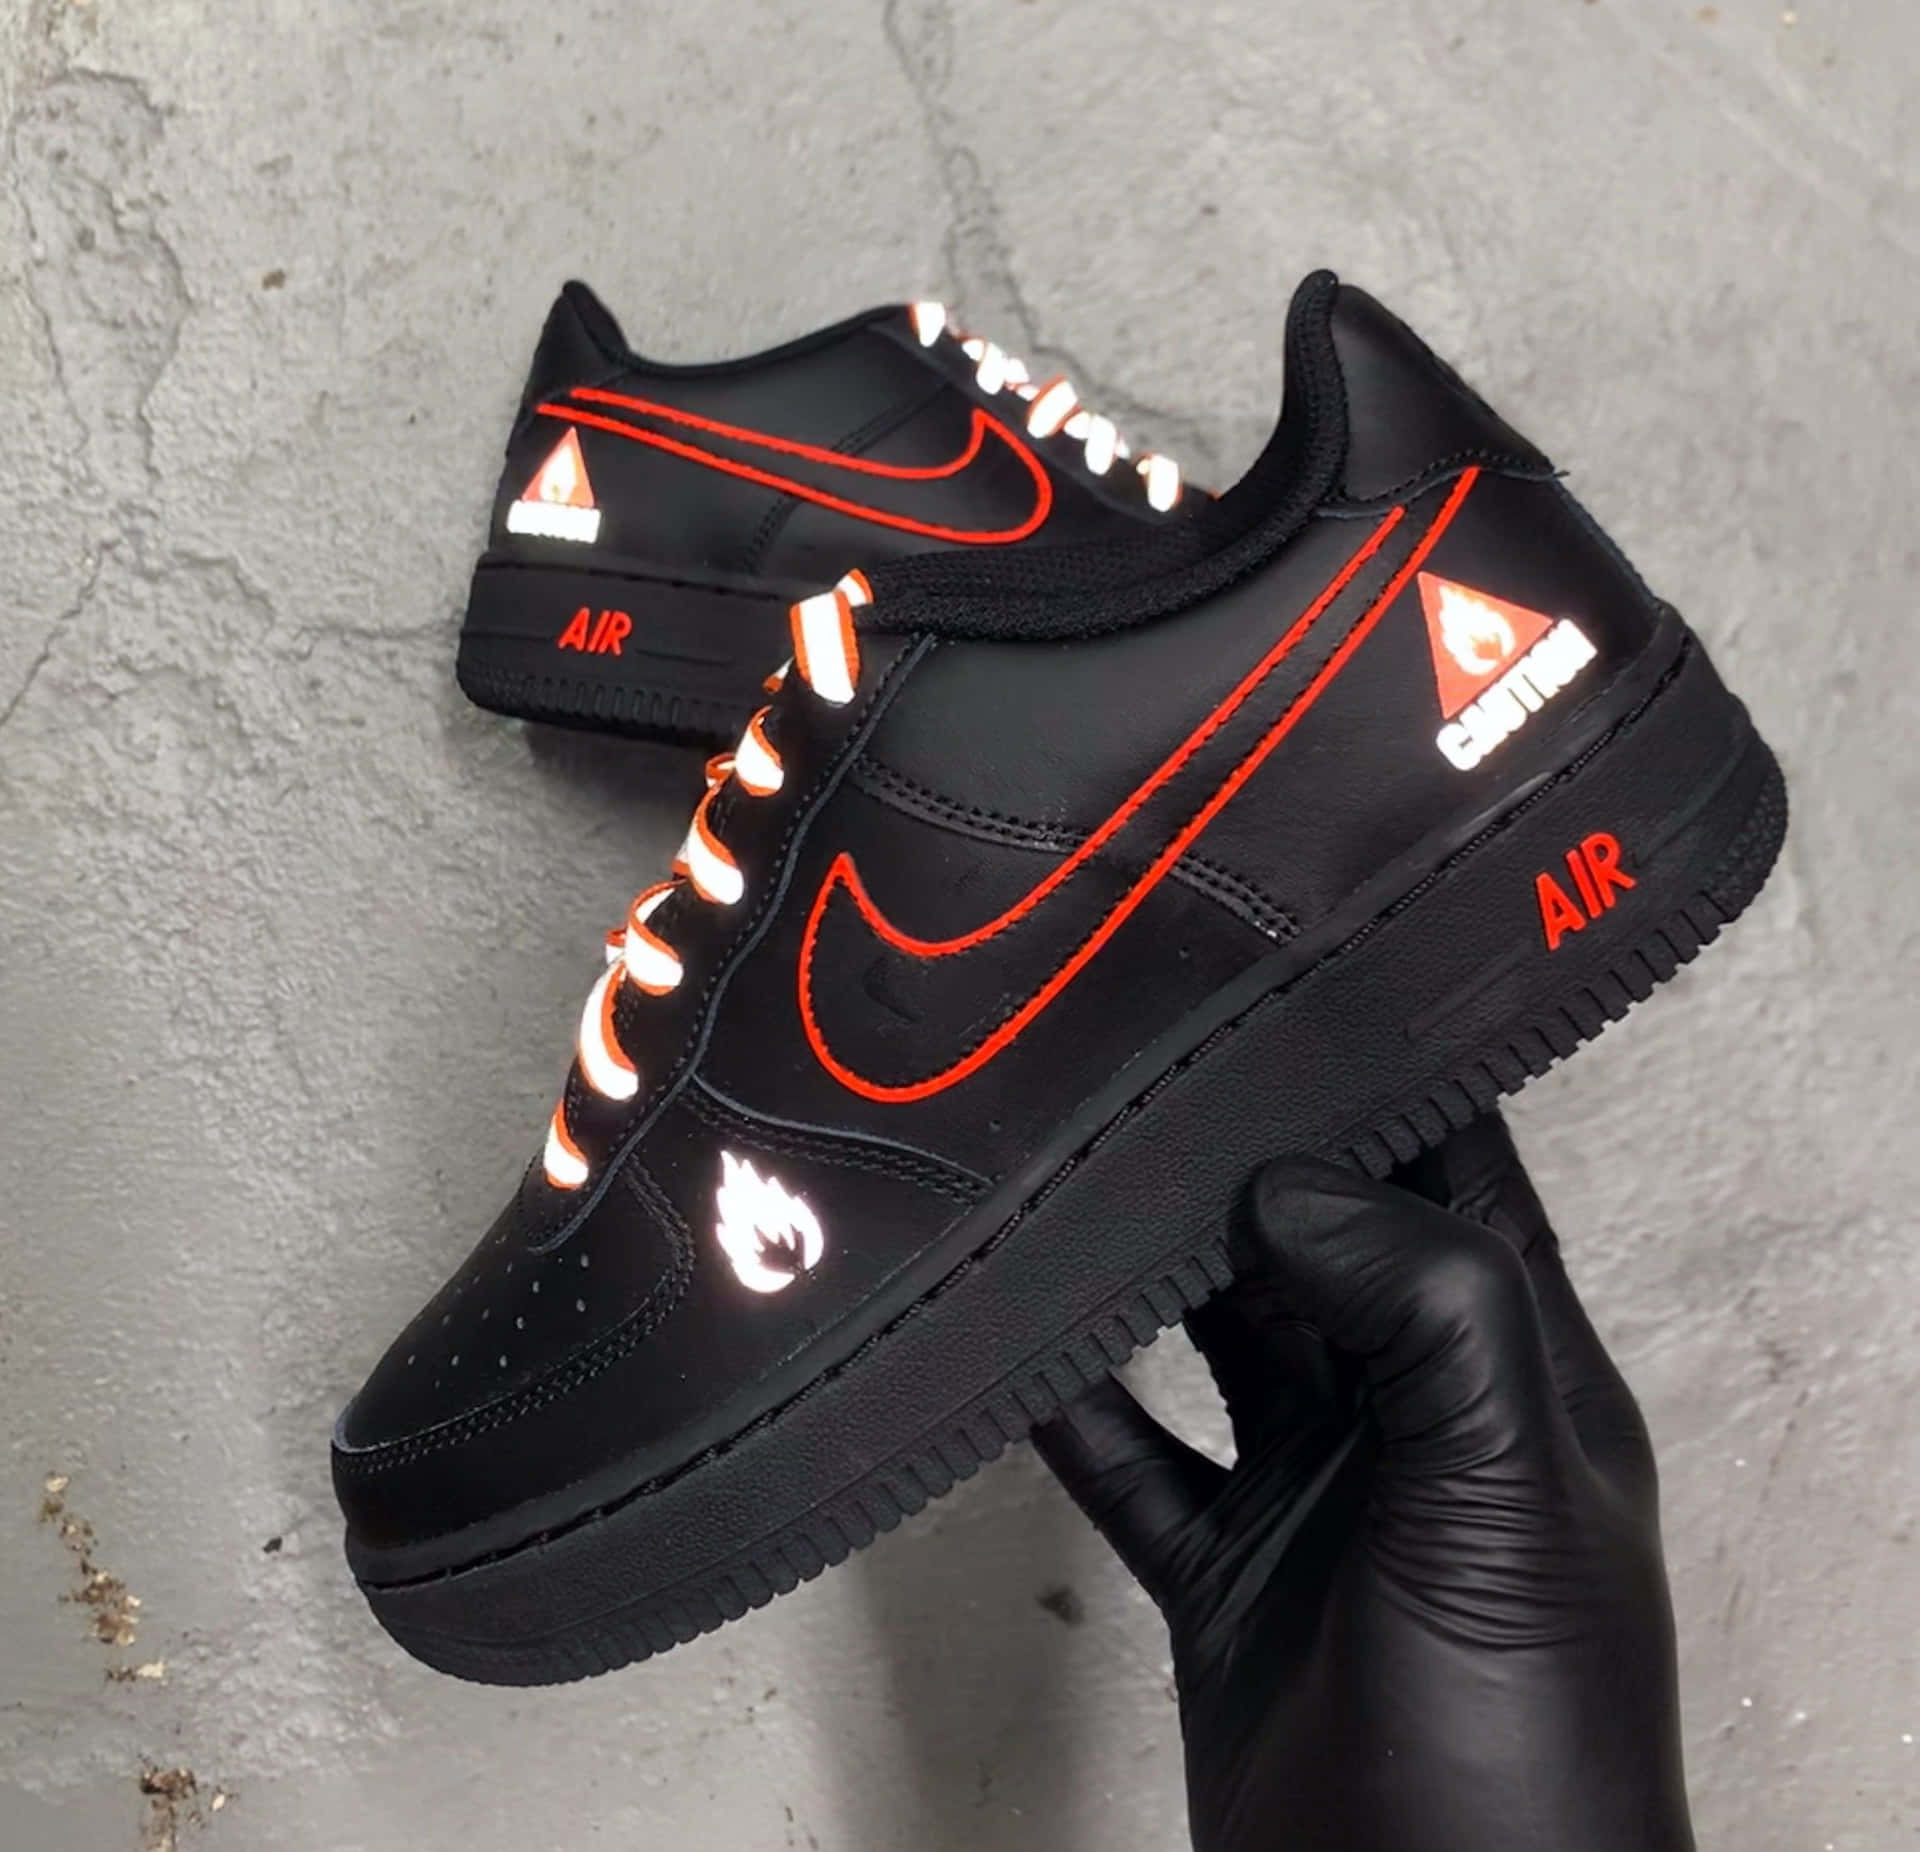 Immaginedelle Nike Air Force 1 Nere E Rosse